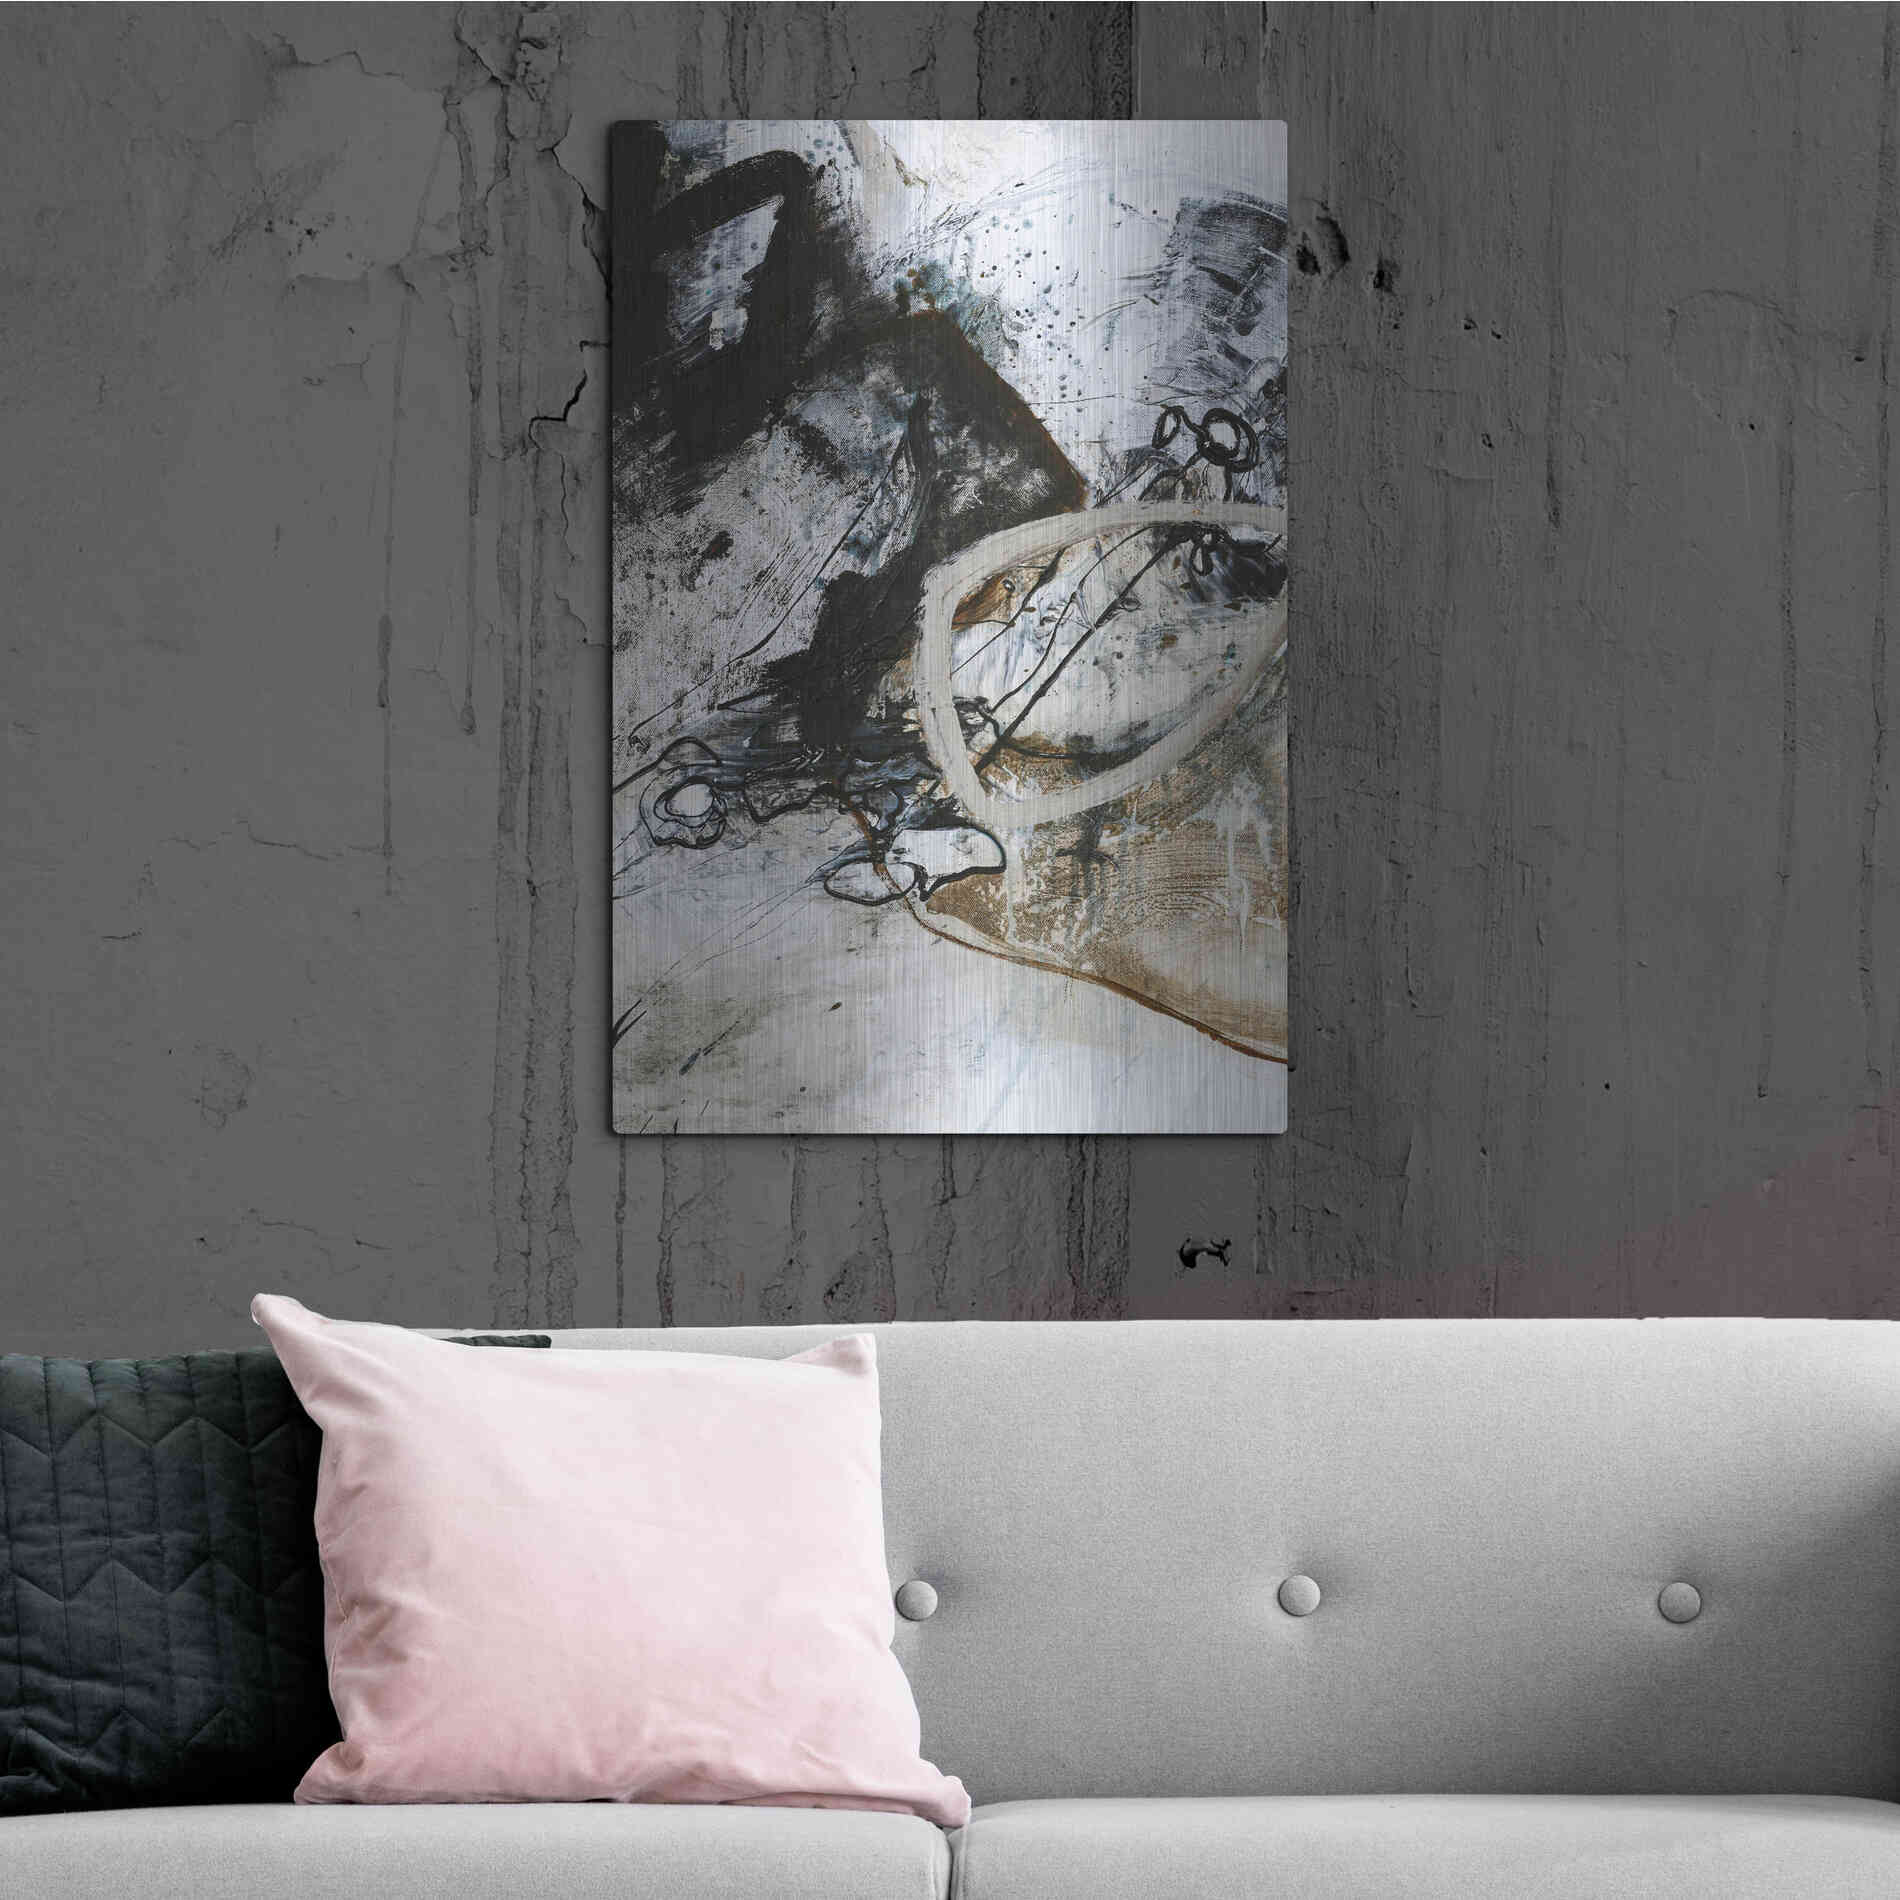 Luxe Metal Art 'Black and White 2' by Design Fabrikken, Metal Wall Art,24x36